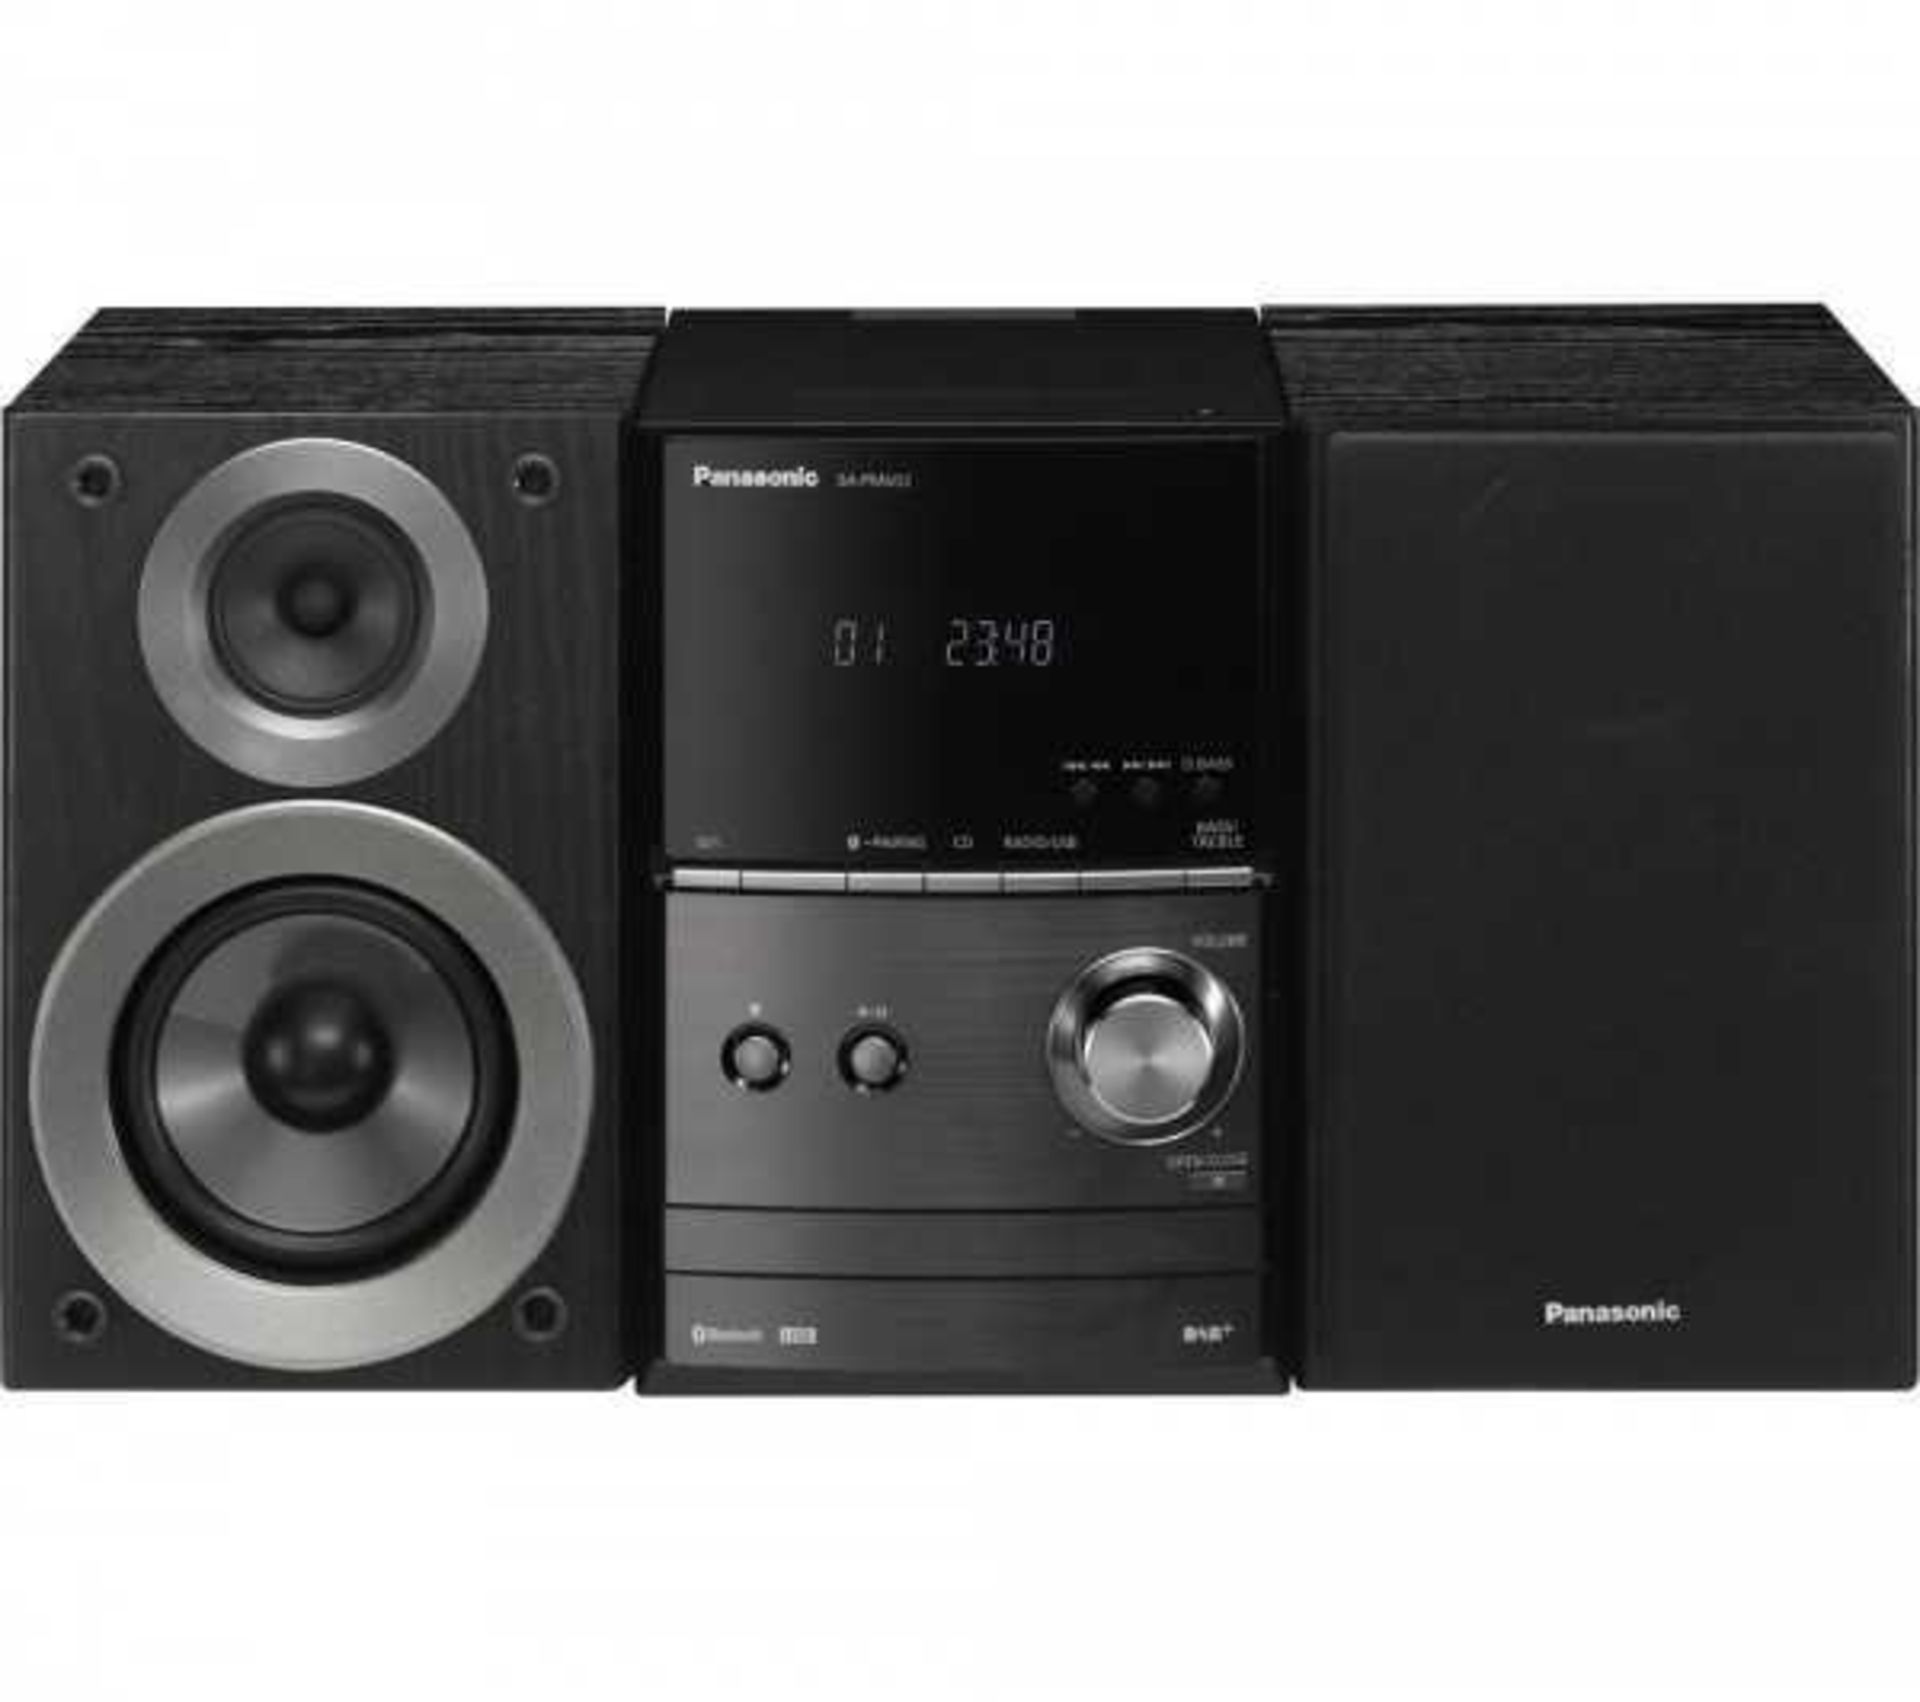 Combined RRP £180 Lot To Contain Three Assorted Audio Systems - Image 2 of 2